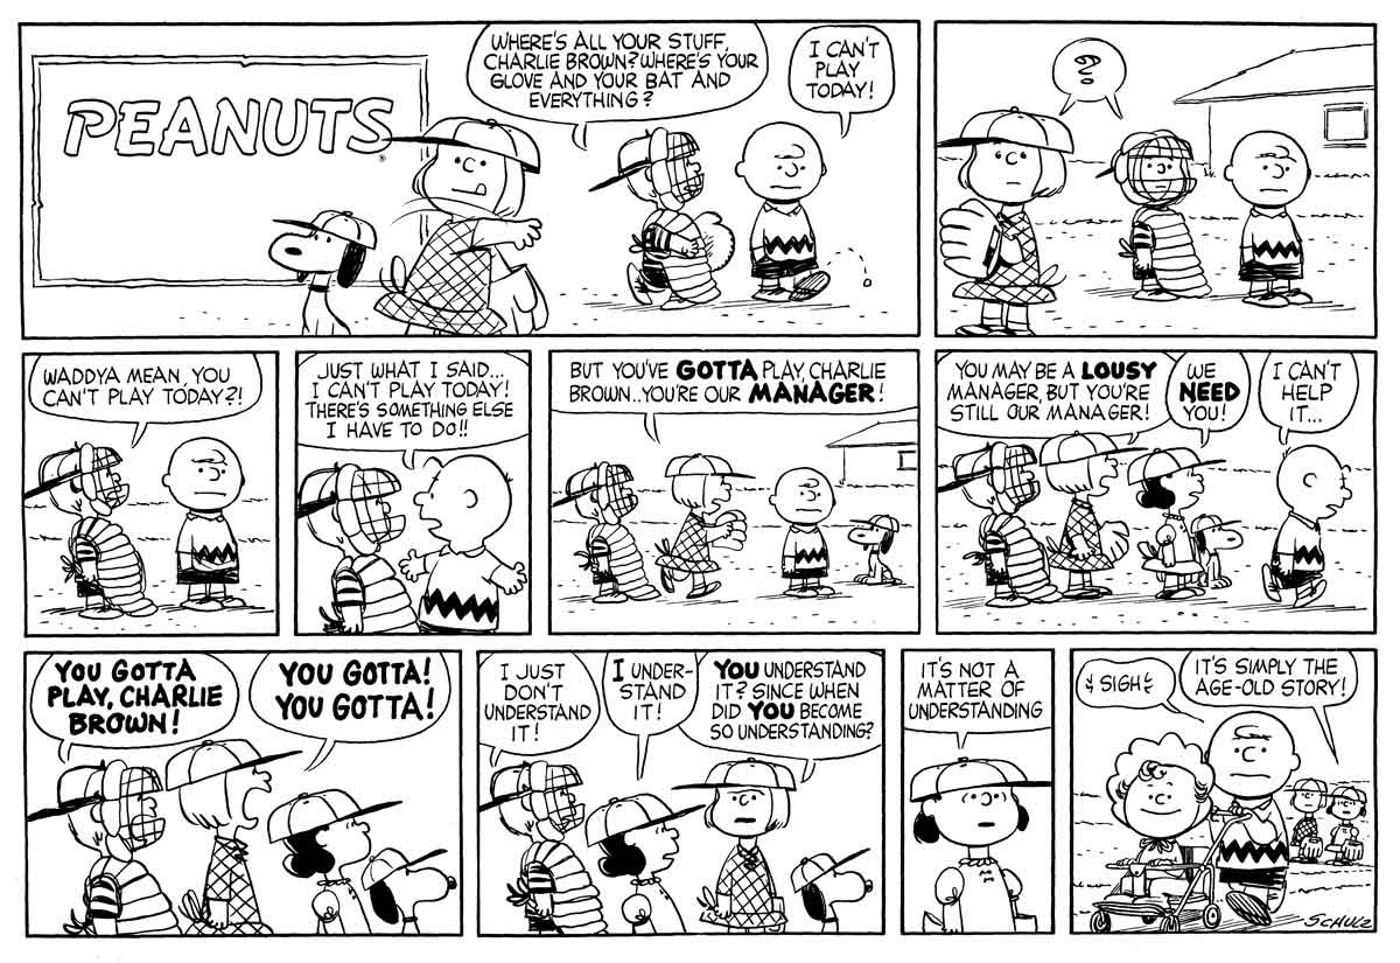 Sally's First Appearance in Peanuts